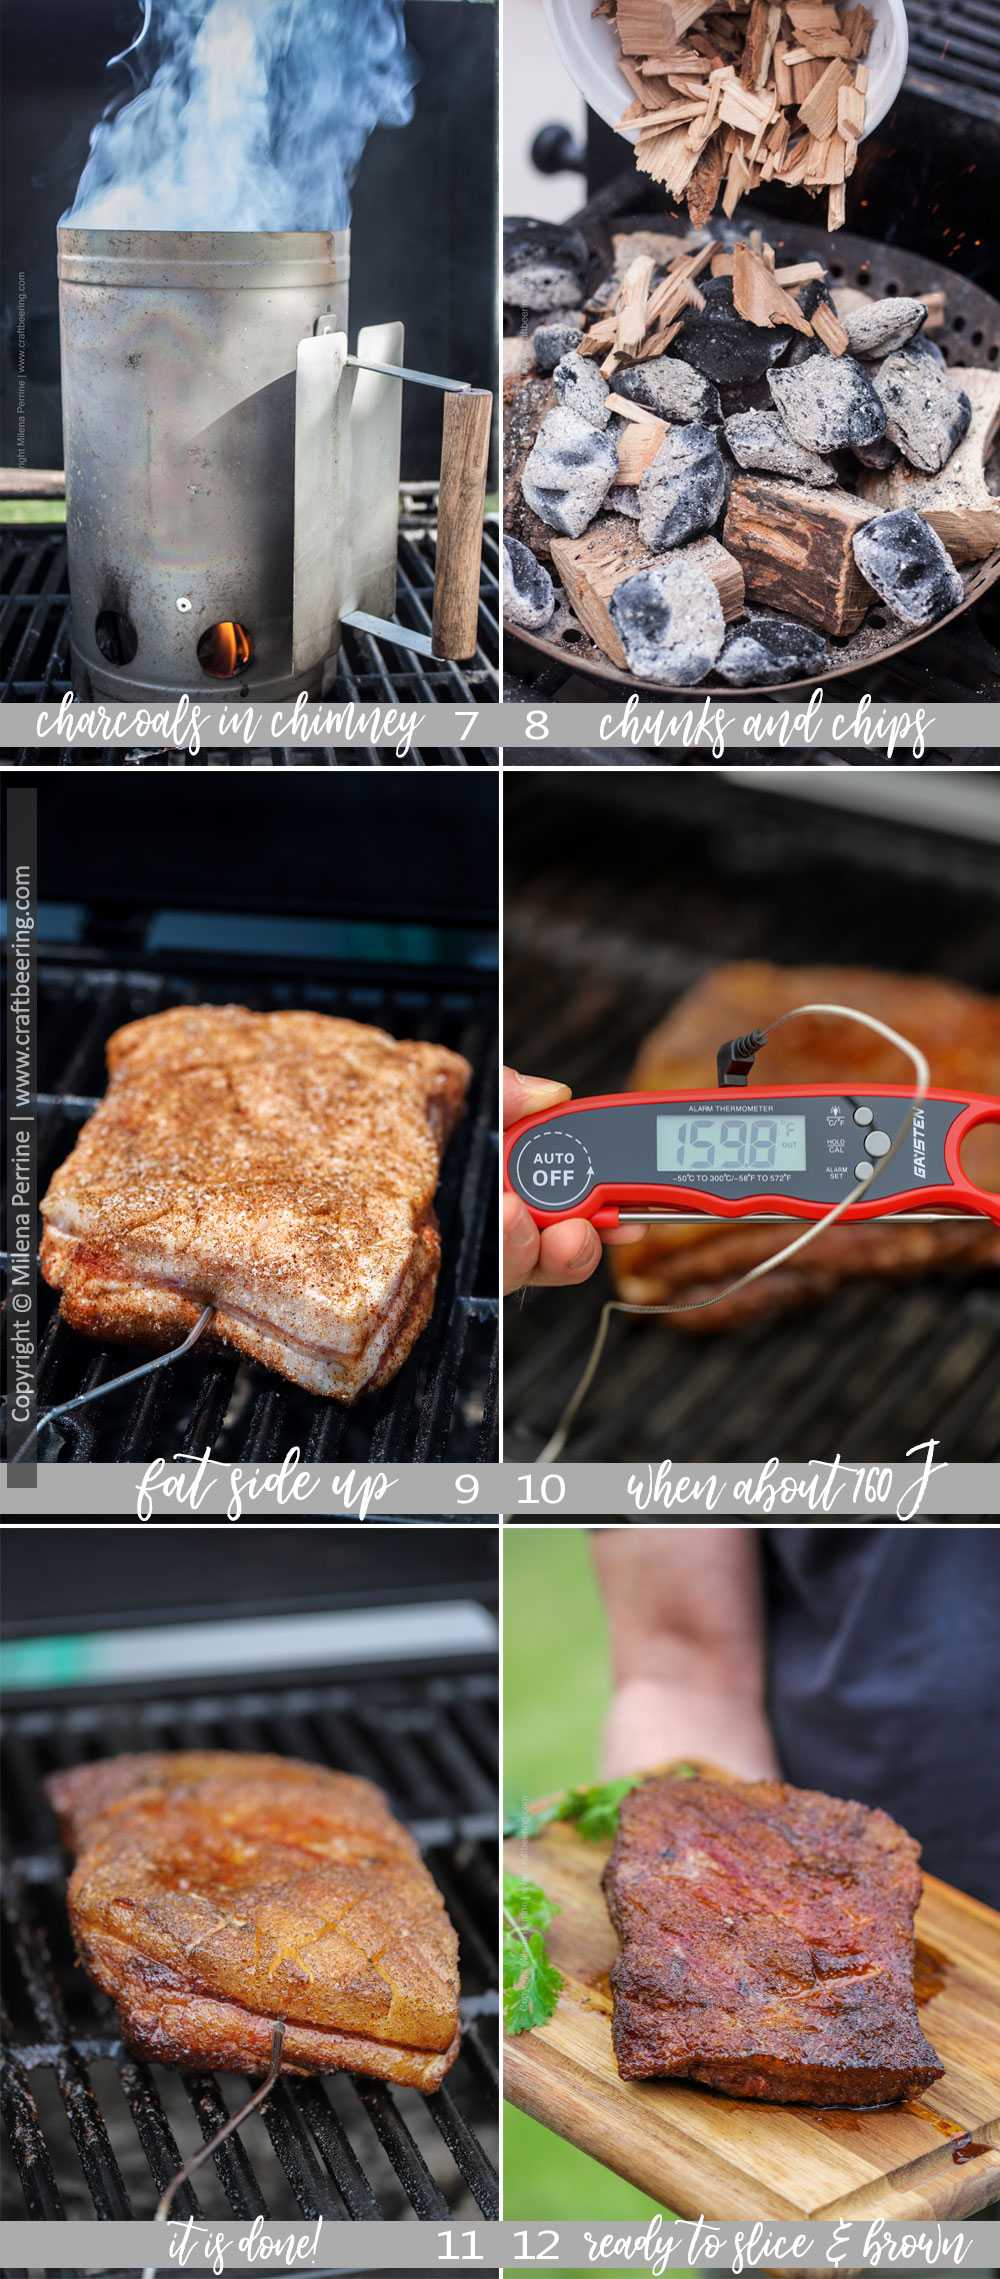 Step by step how to smoked pork belly - from setting up the smoker to the correct temperature to pull it at the end. 